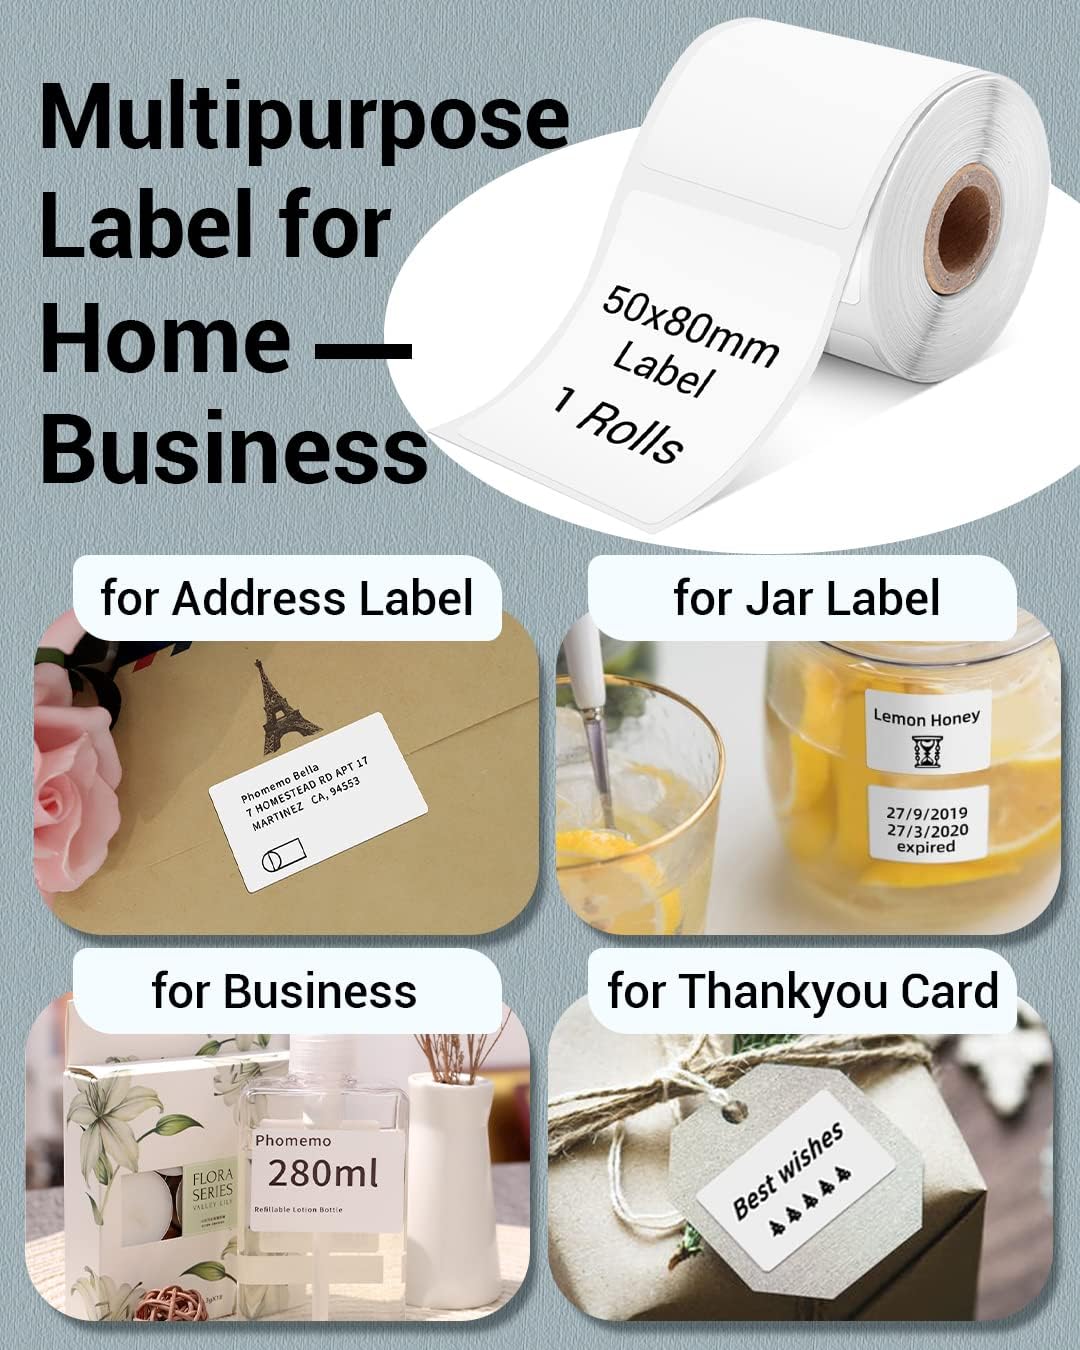 Phomemo Thermal Labels for M110/M221/M220/M120/M200,50x80mm